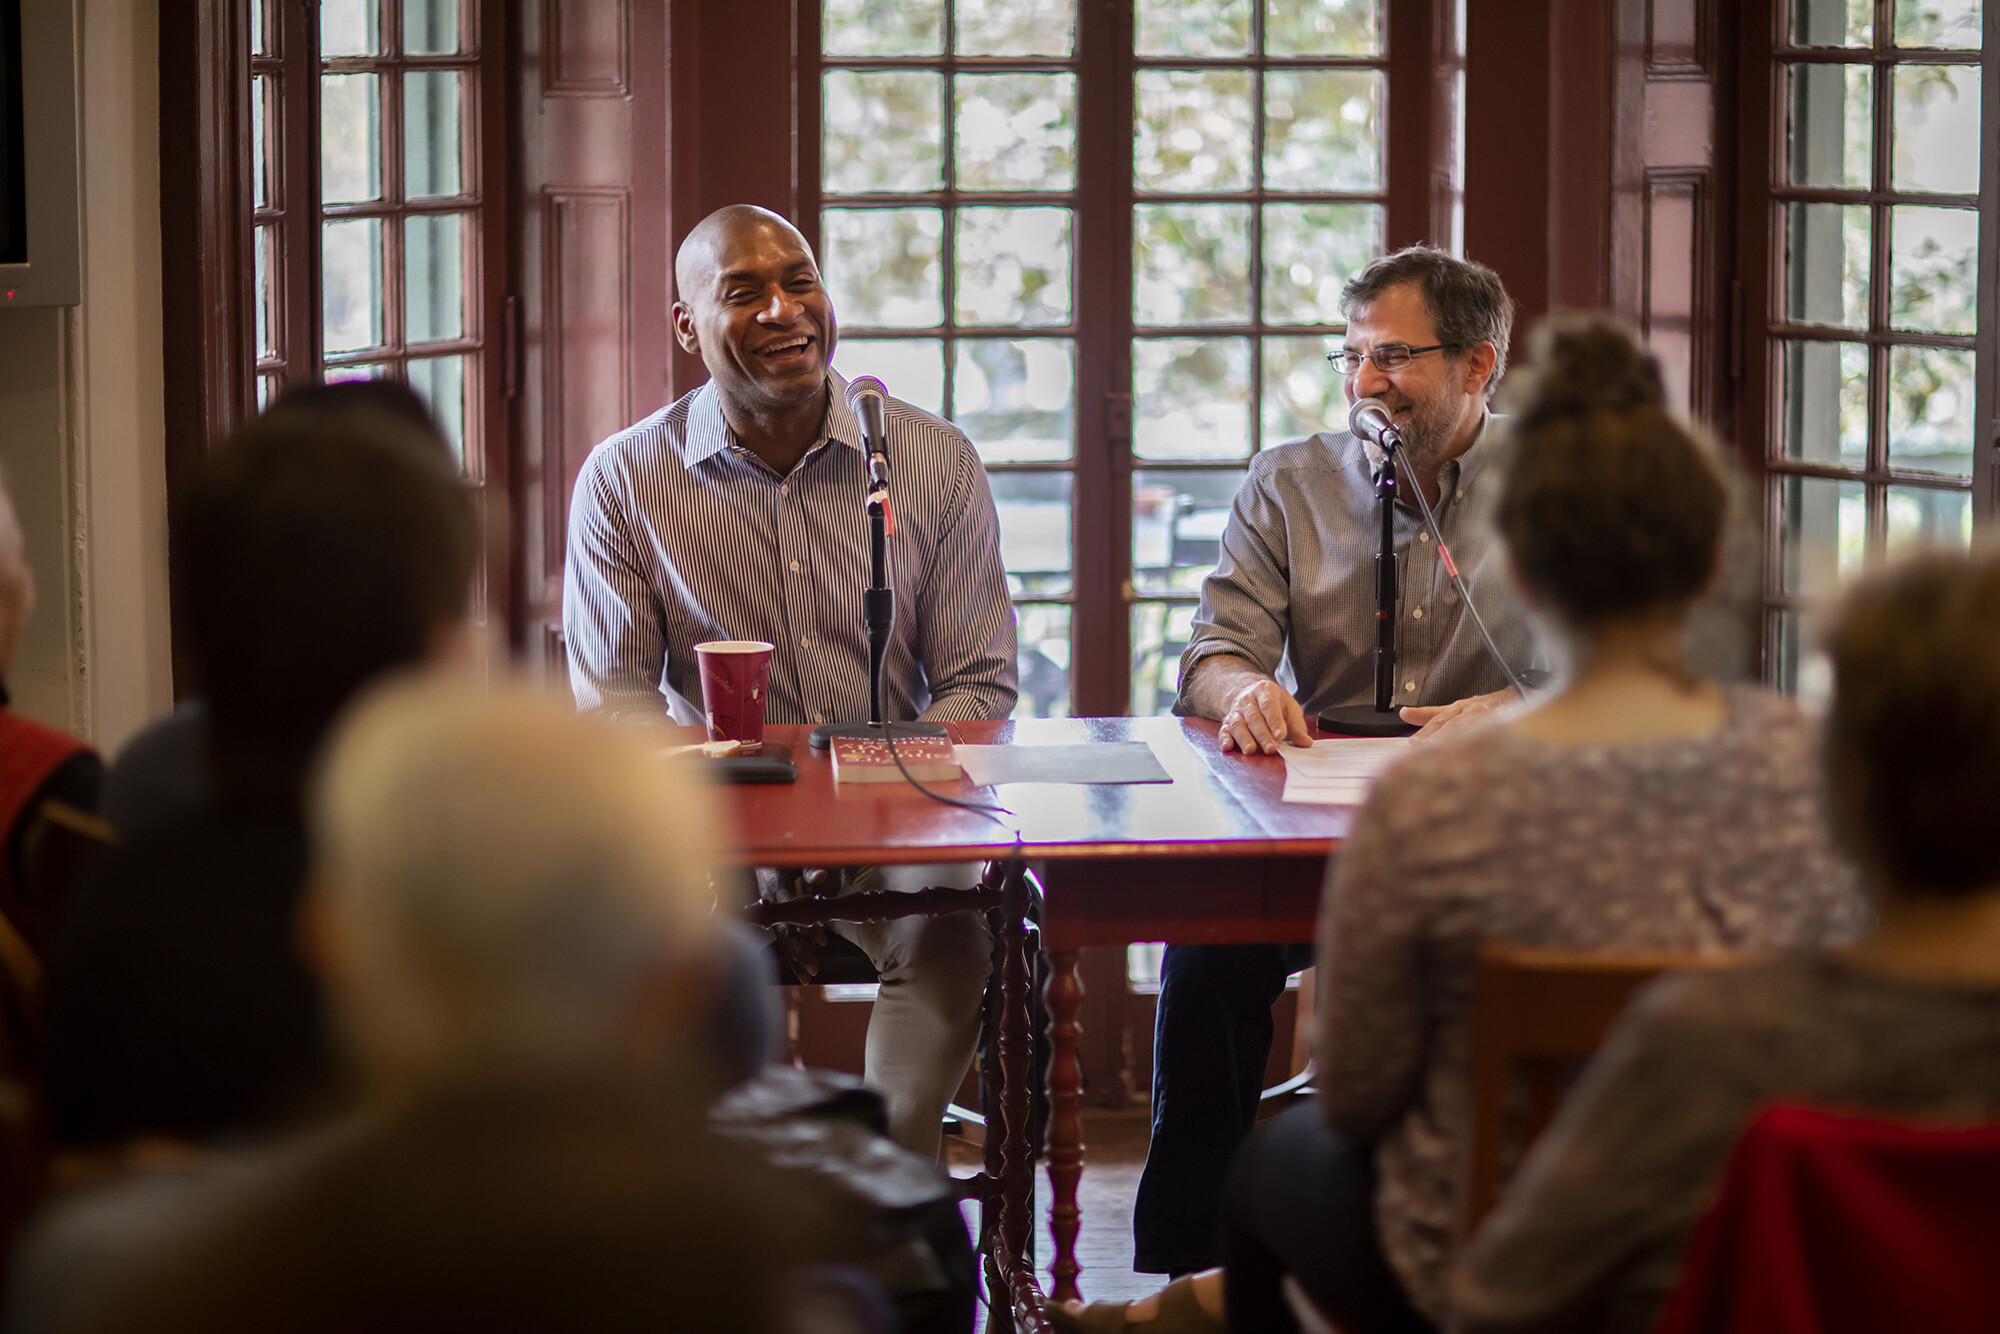 Charles Blow and Al Filreis seated at a table in front of a crowd at the Kelly Writers House.